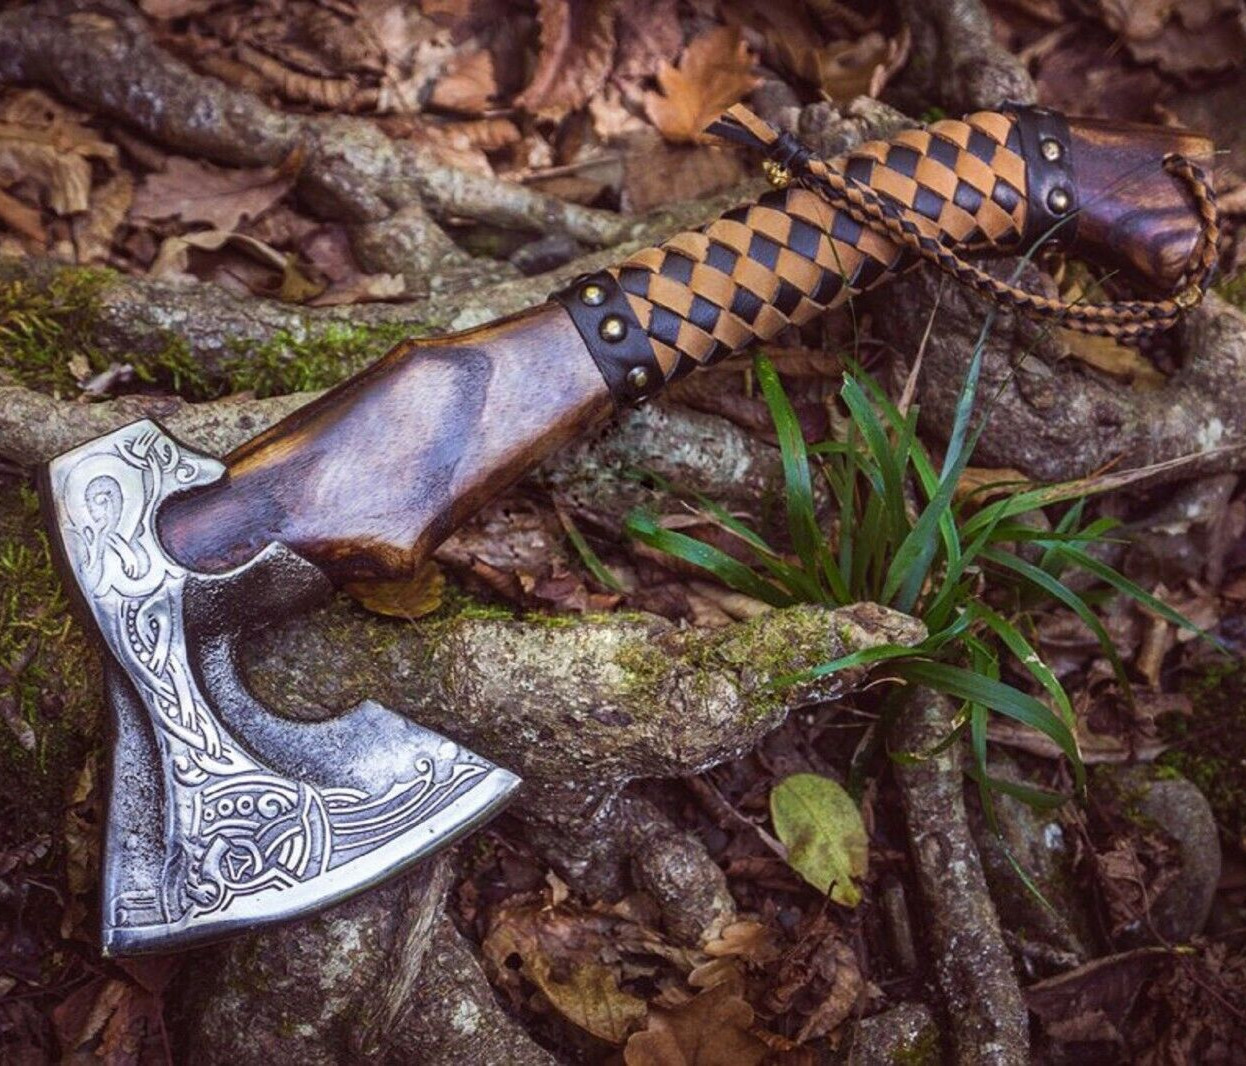 Valhalla Viking Axe - Hand-Forged Carbon Steel Battle Ready Hatchet Throwing Axe